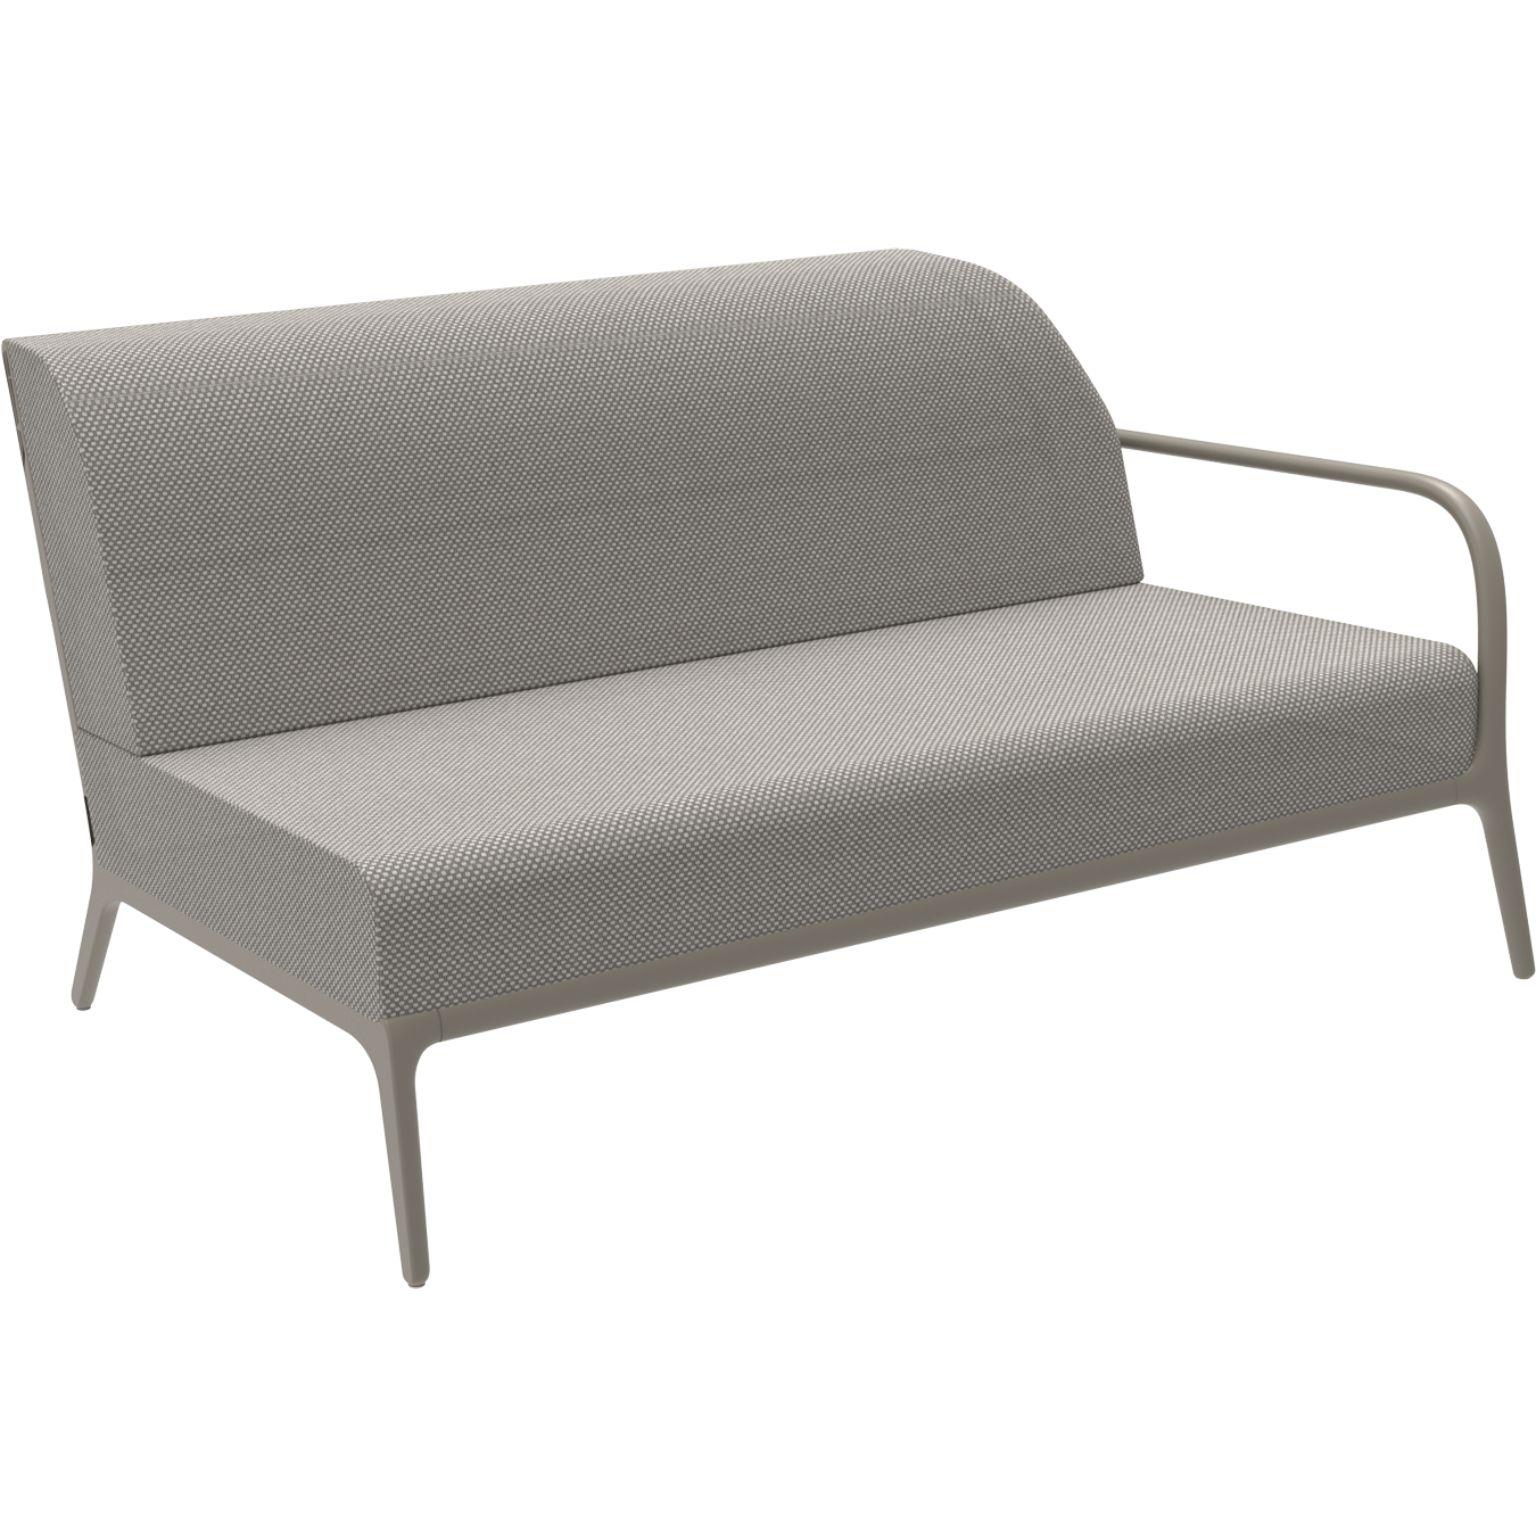 Xaloc left 160 cream modular sofa by MOWEE
Dimensions: D100 x W160 x H81 cm (Seat Height 42cm)
Material: Aluminium, Textile
Weight: 37 kg
Also Available in different colours and finishes. 

 Xaloc synthesizes the lines of interior furniture to